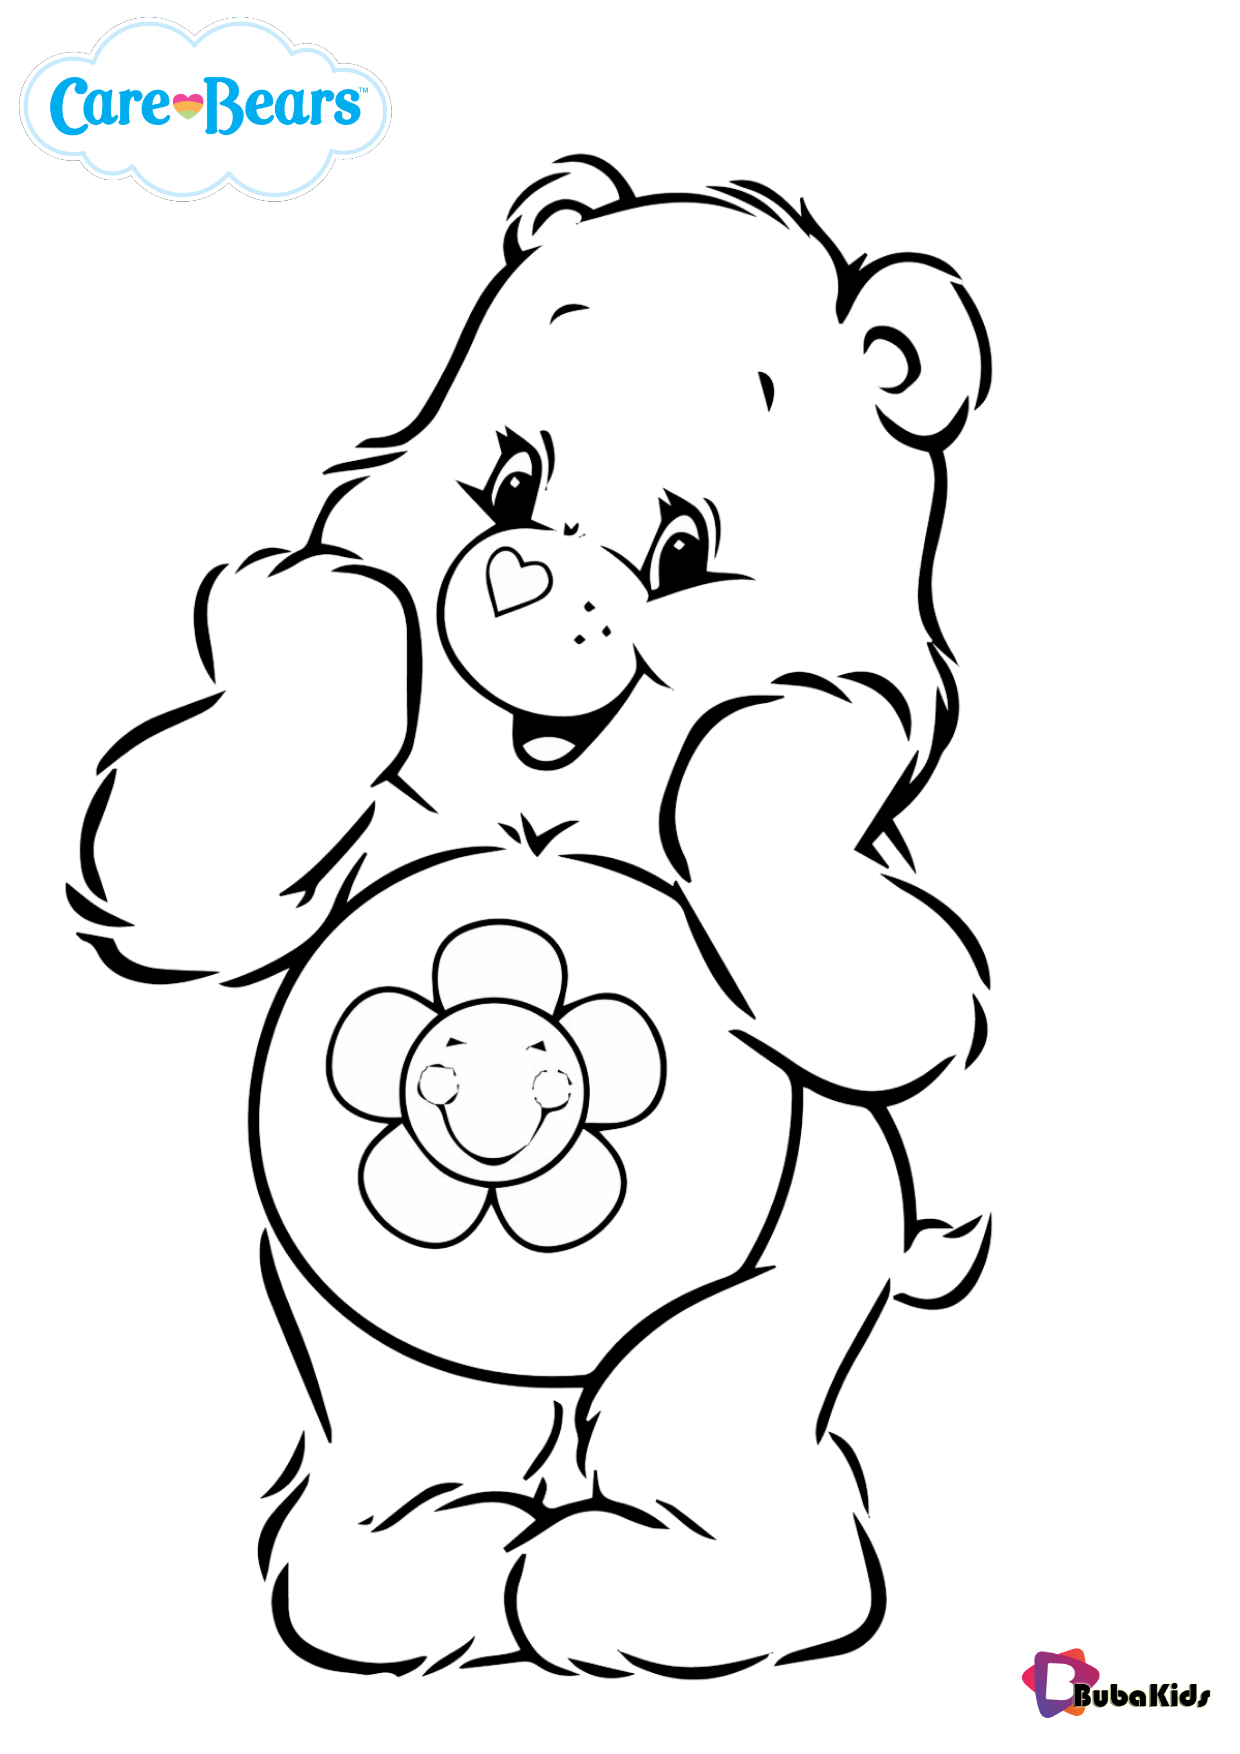 Care Bears Harmony bear coloring pages Wallpaper